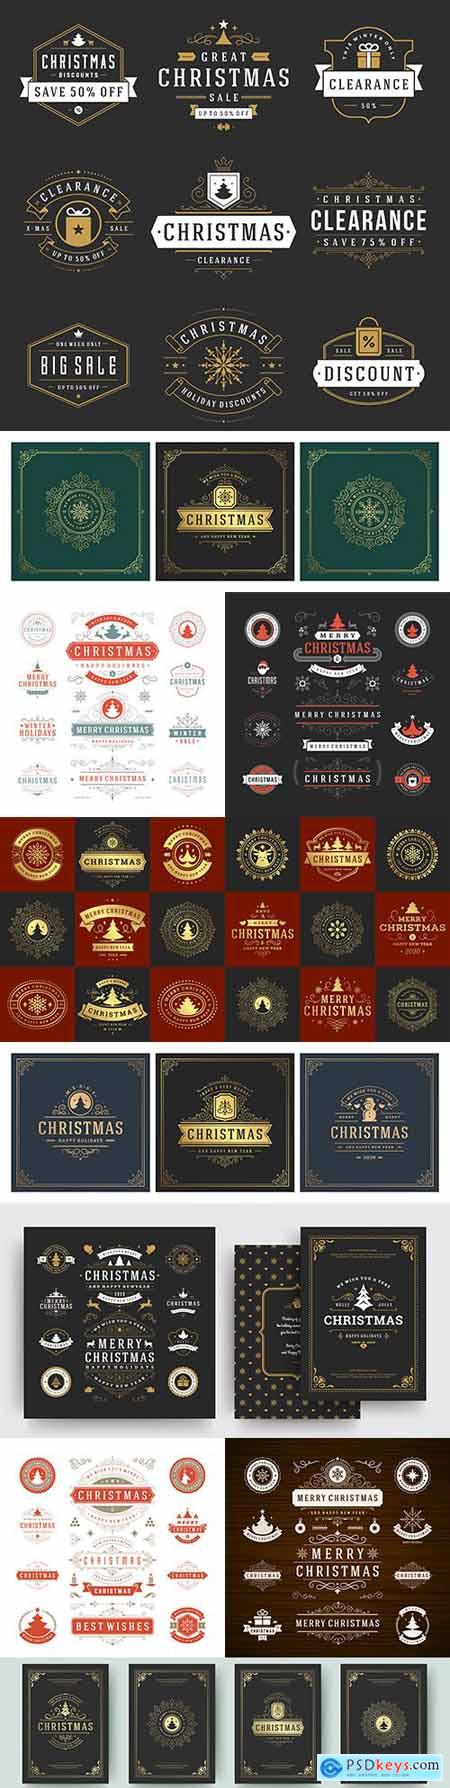 Christmas labels and design elements for greeting card logos » Free ...